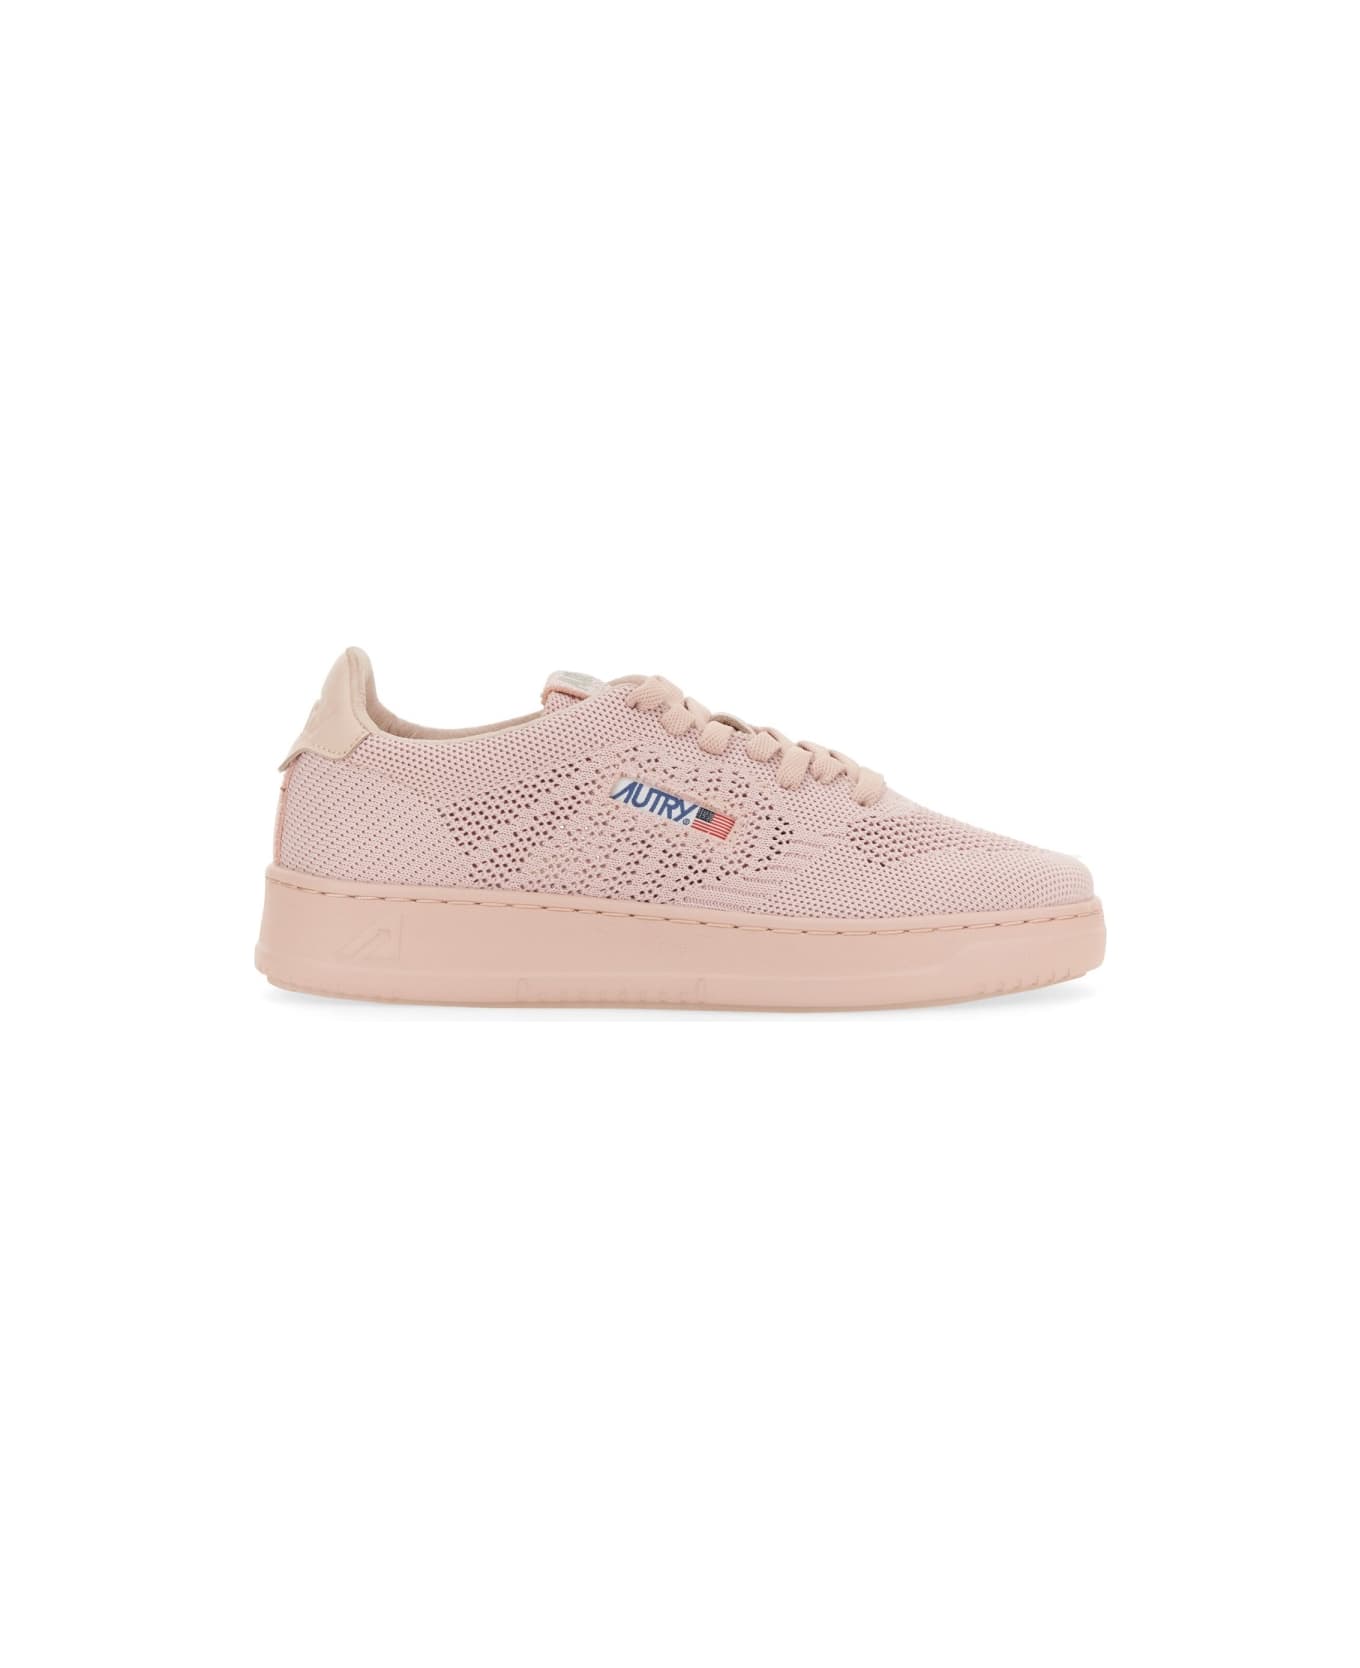 Autry Pink Easeknit Low Sneakers - Pink